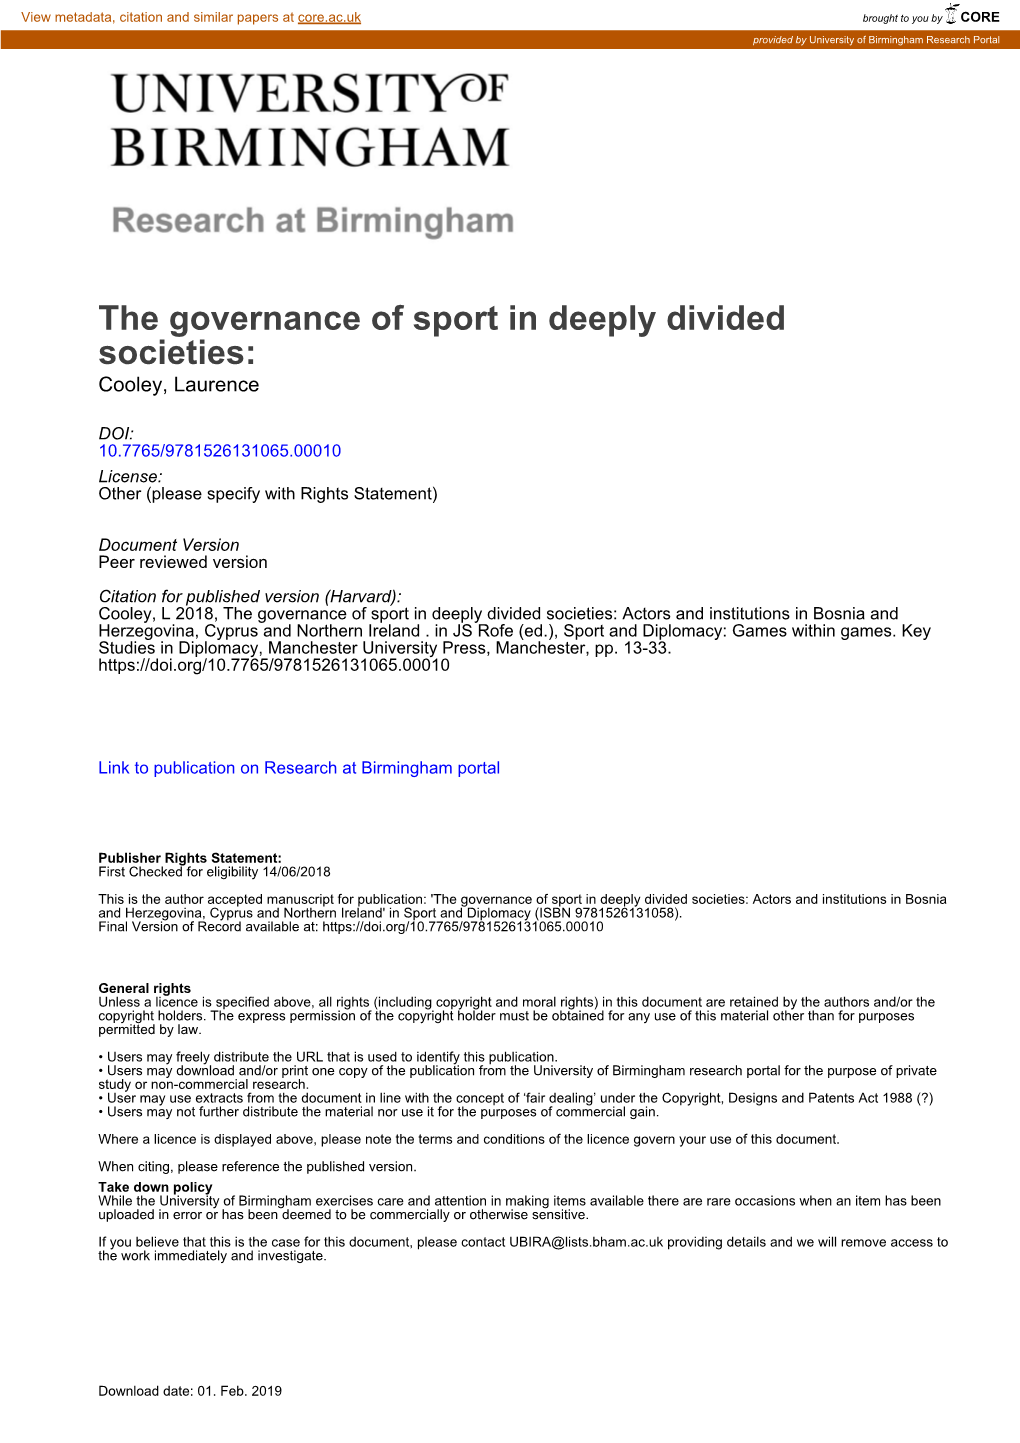 The Governance of Sport in Deeply Divided Societies: Cooley, Laurence